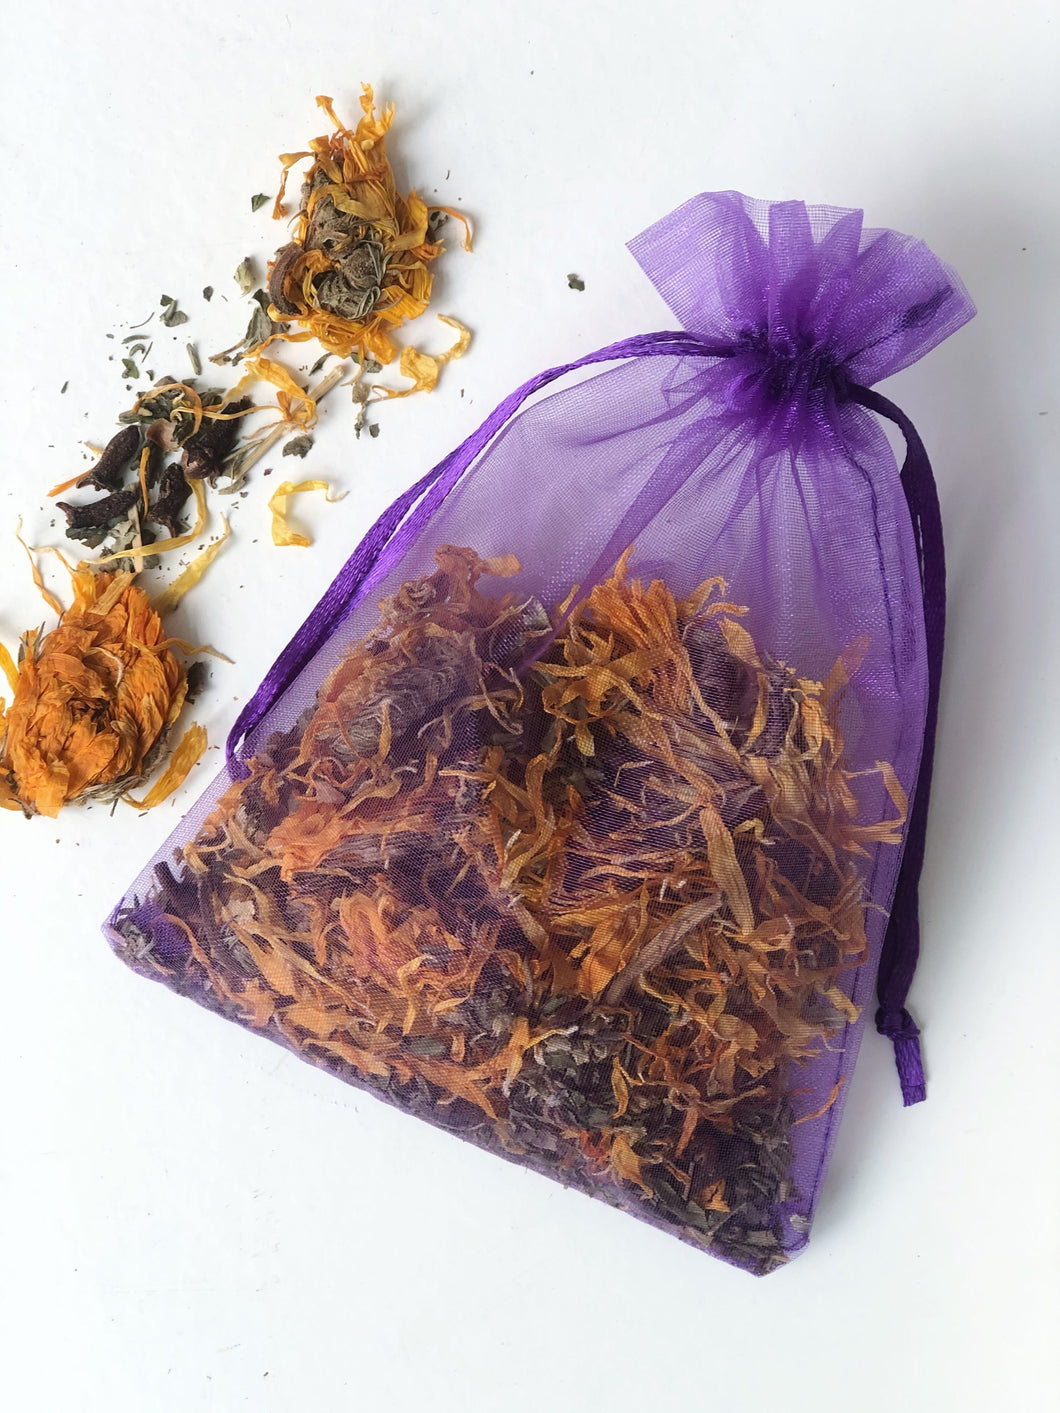 Psychic Witch Herbal Mix